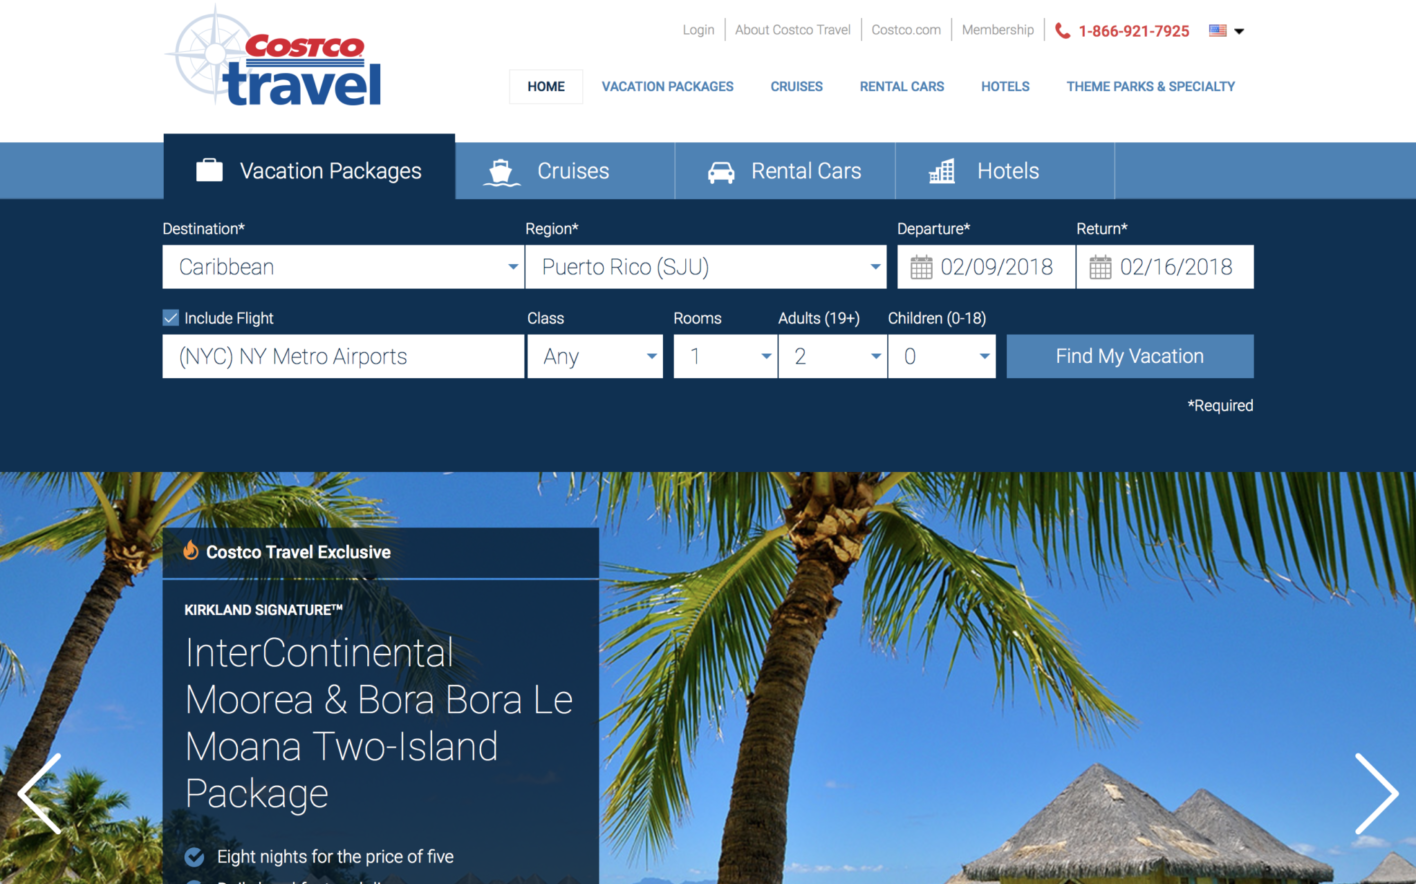 costco luxury gold travel reviews